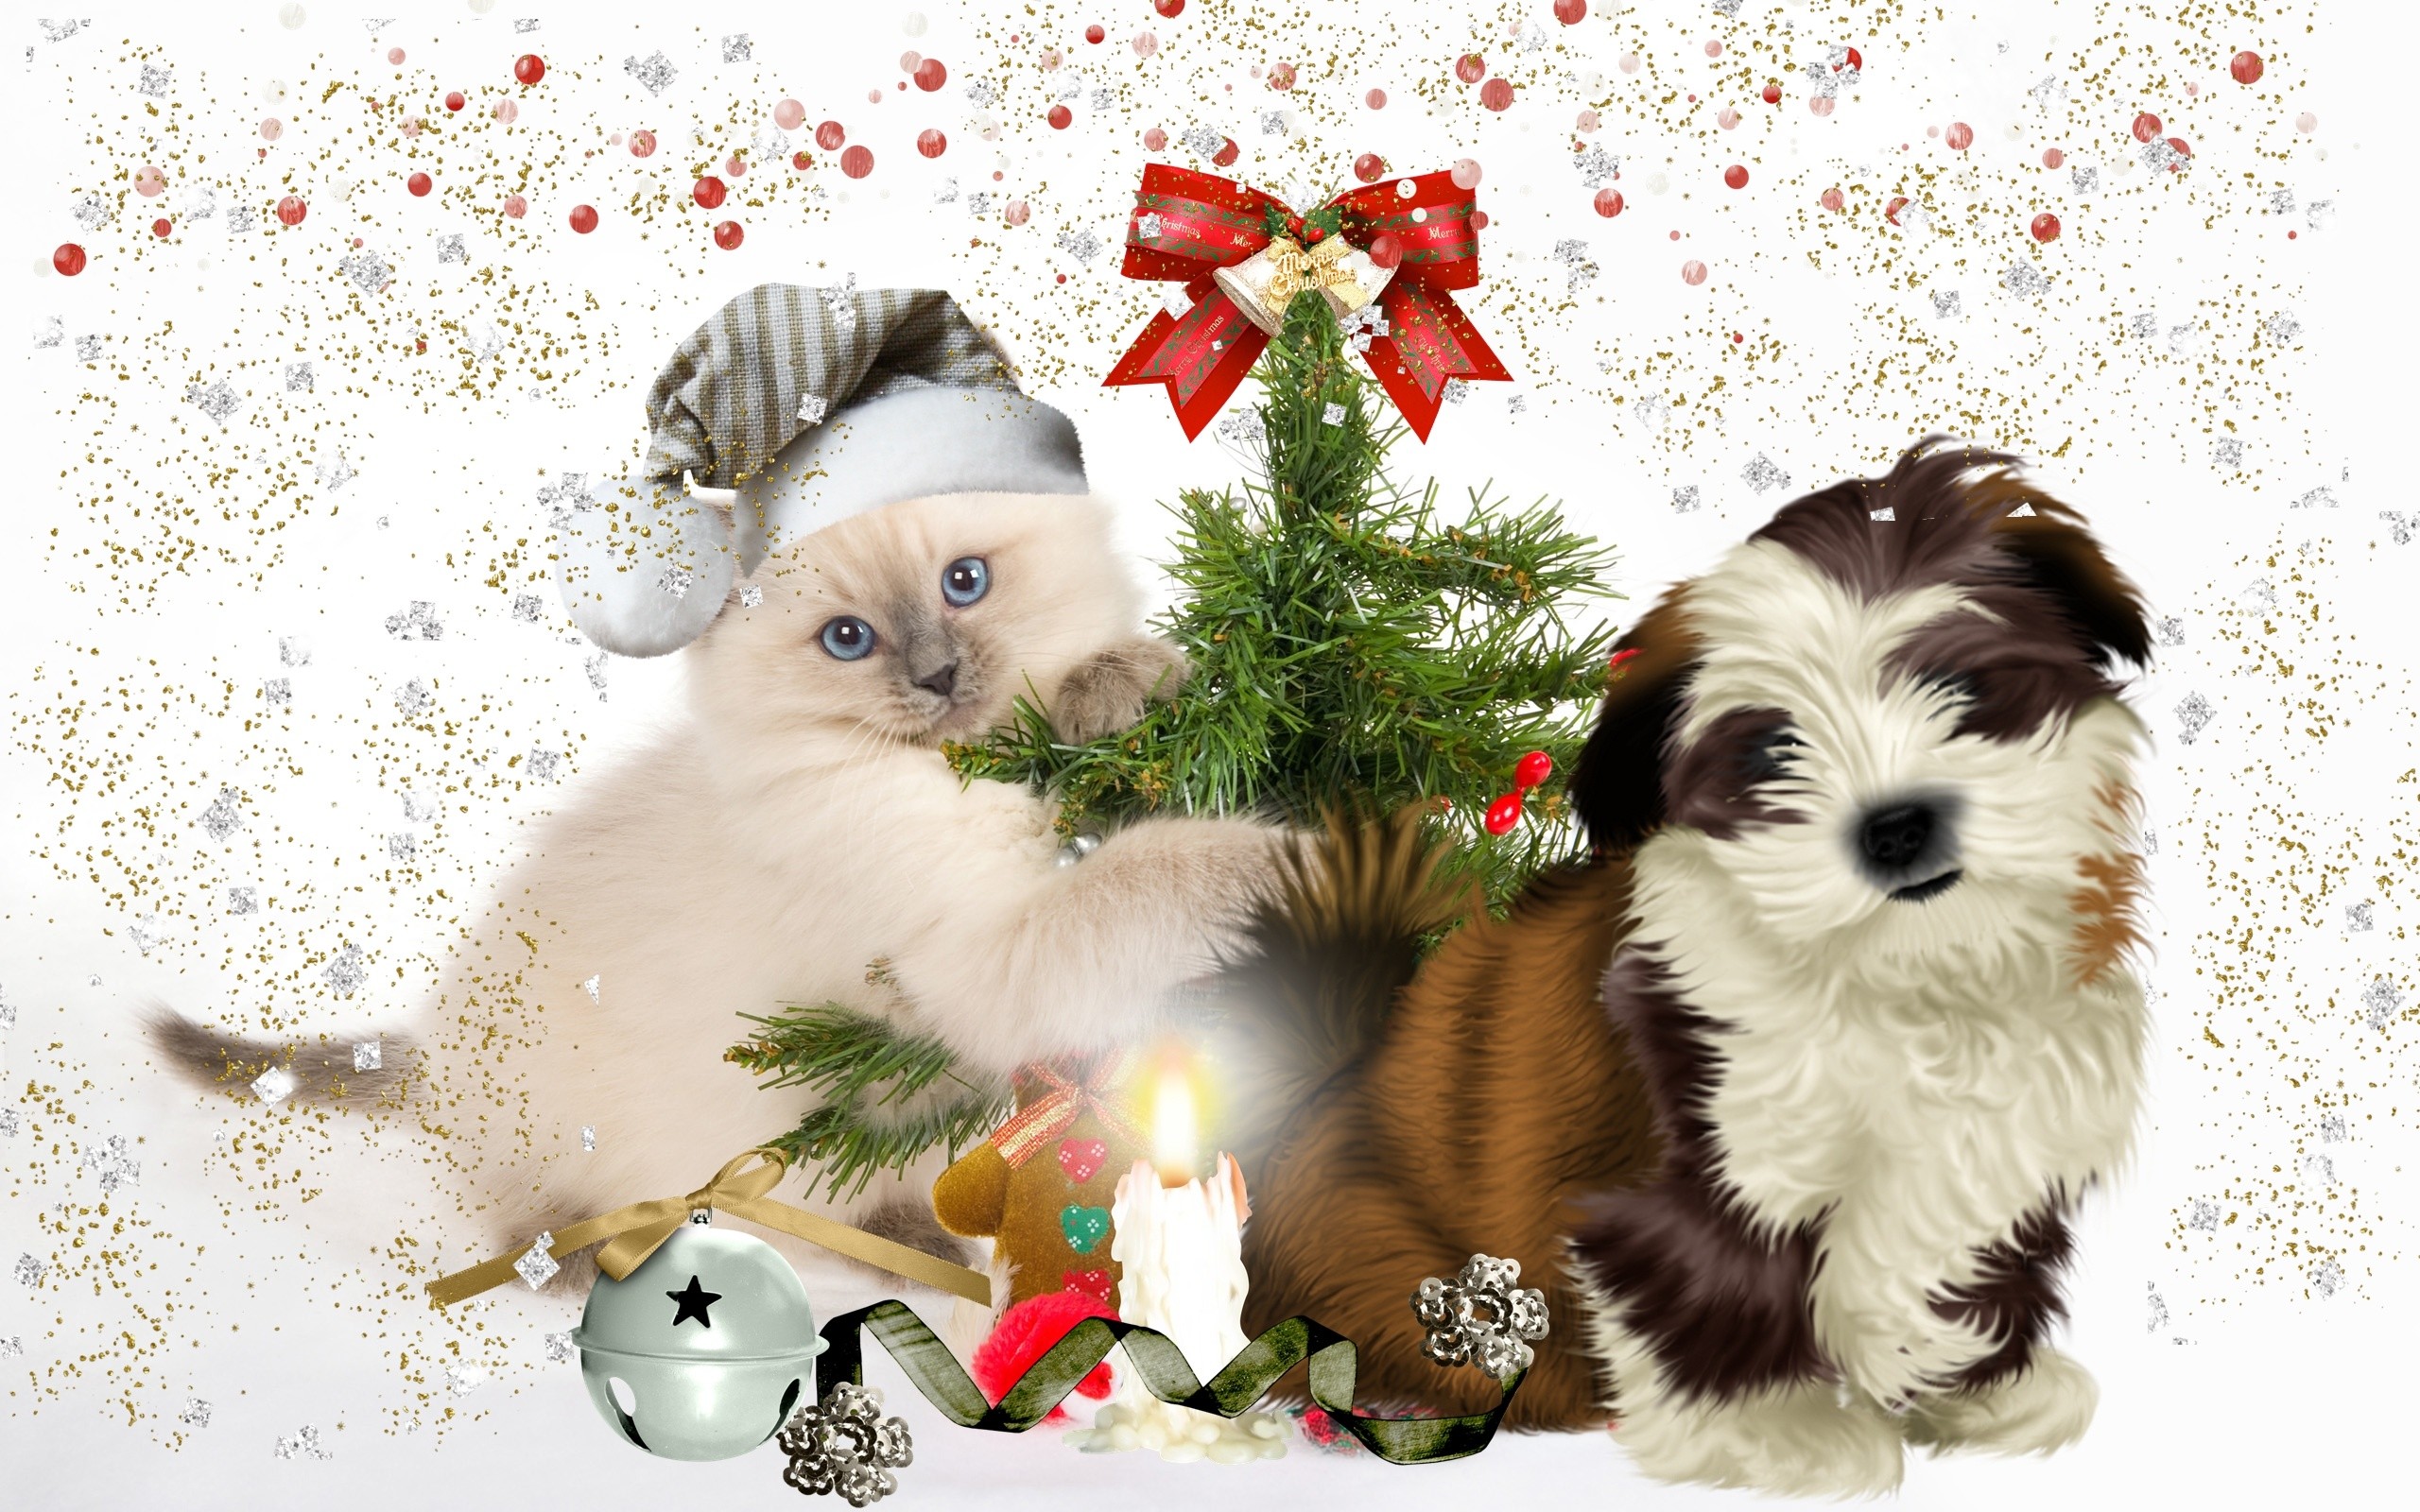 2560x1600 40 Wallpapers and Pictures of Dogs Pug Wallpaper, Screensaver, Background  Cute Pug Puppy Christmas .